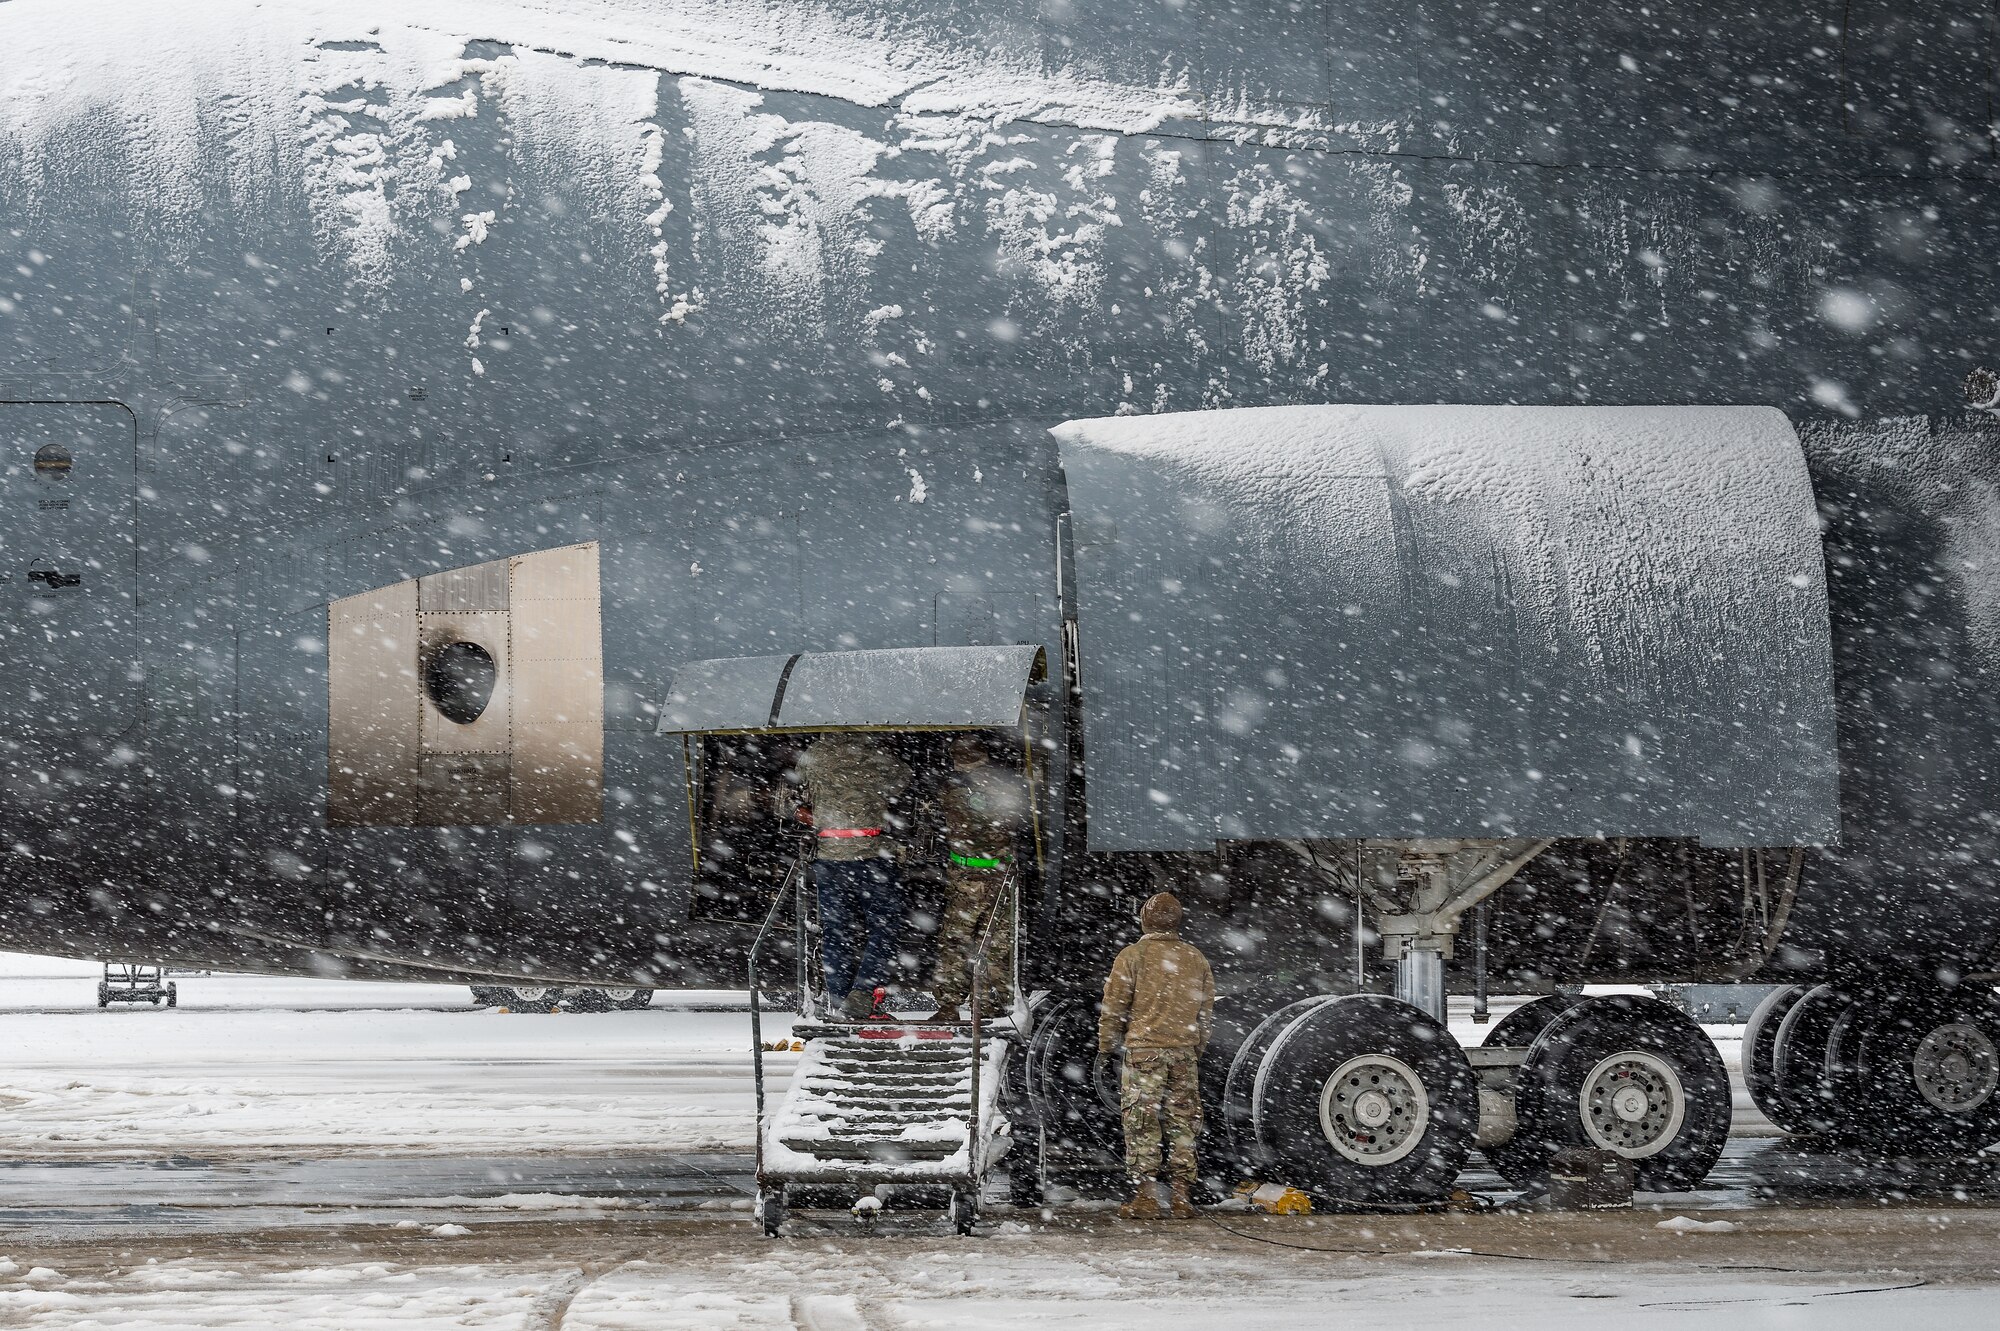 As snow fell, maintainers from the 436th Aircraft Maintenance Squadron performed maintenance on the right auxiliary power unit of a C-5M Super Galaxy at Dover Air Force Base, Delaware, Feb. 11, 2021. As Winter Storm Roland produced a wintry mix of precipitation, the base continued normal operations and prepared for additional forecast snowfall. (U.S. Air Force photo by Roland Balik)